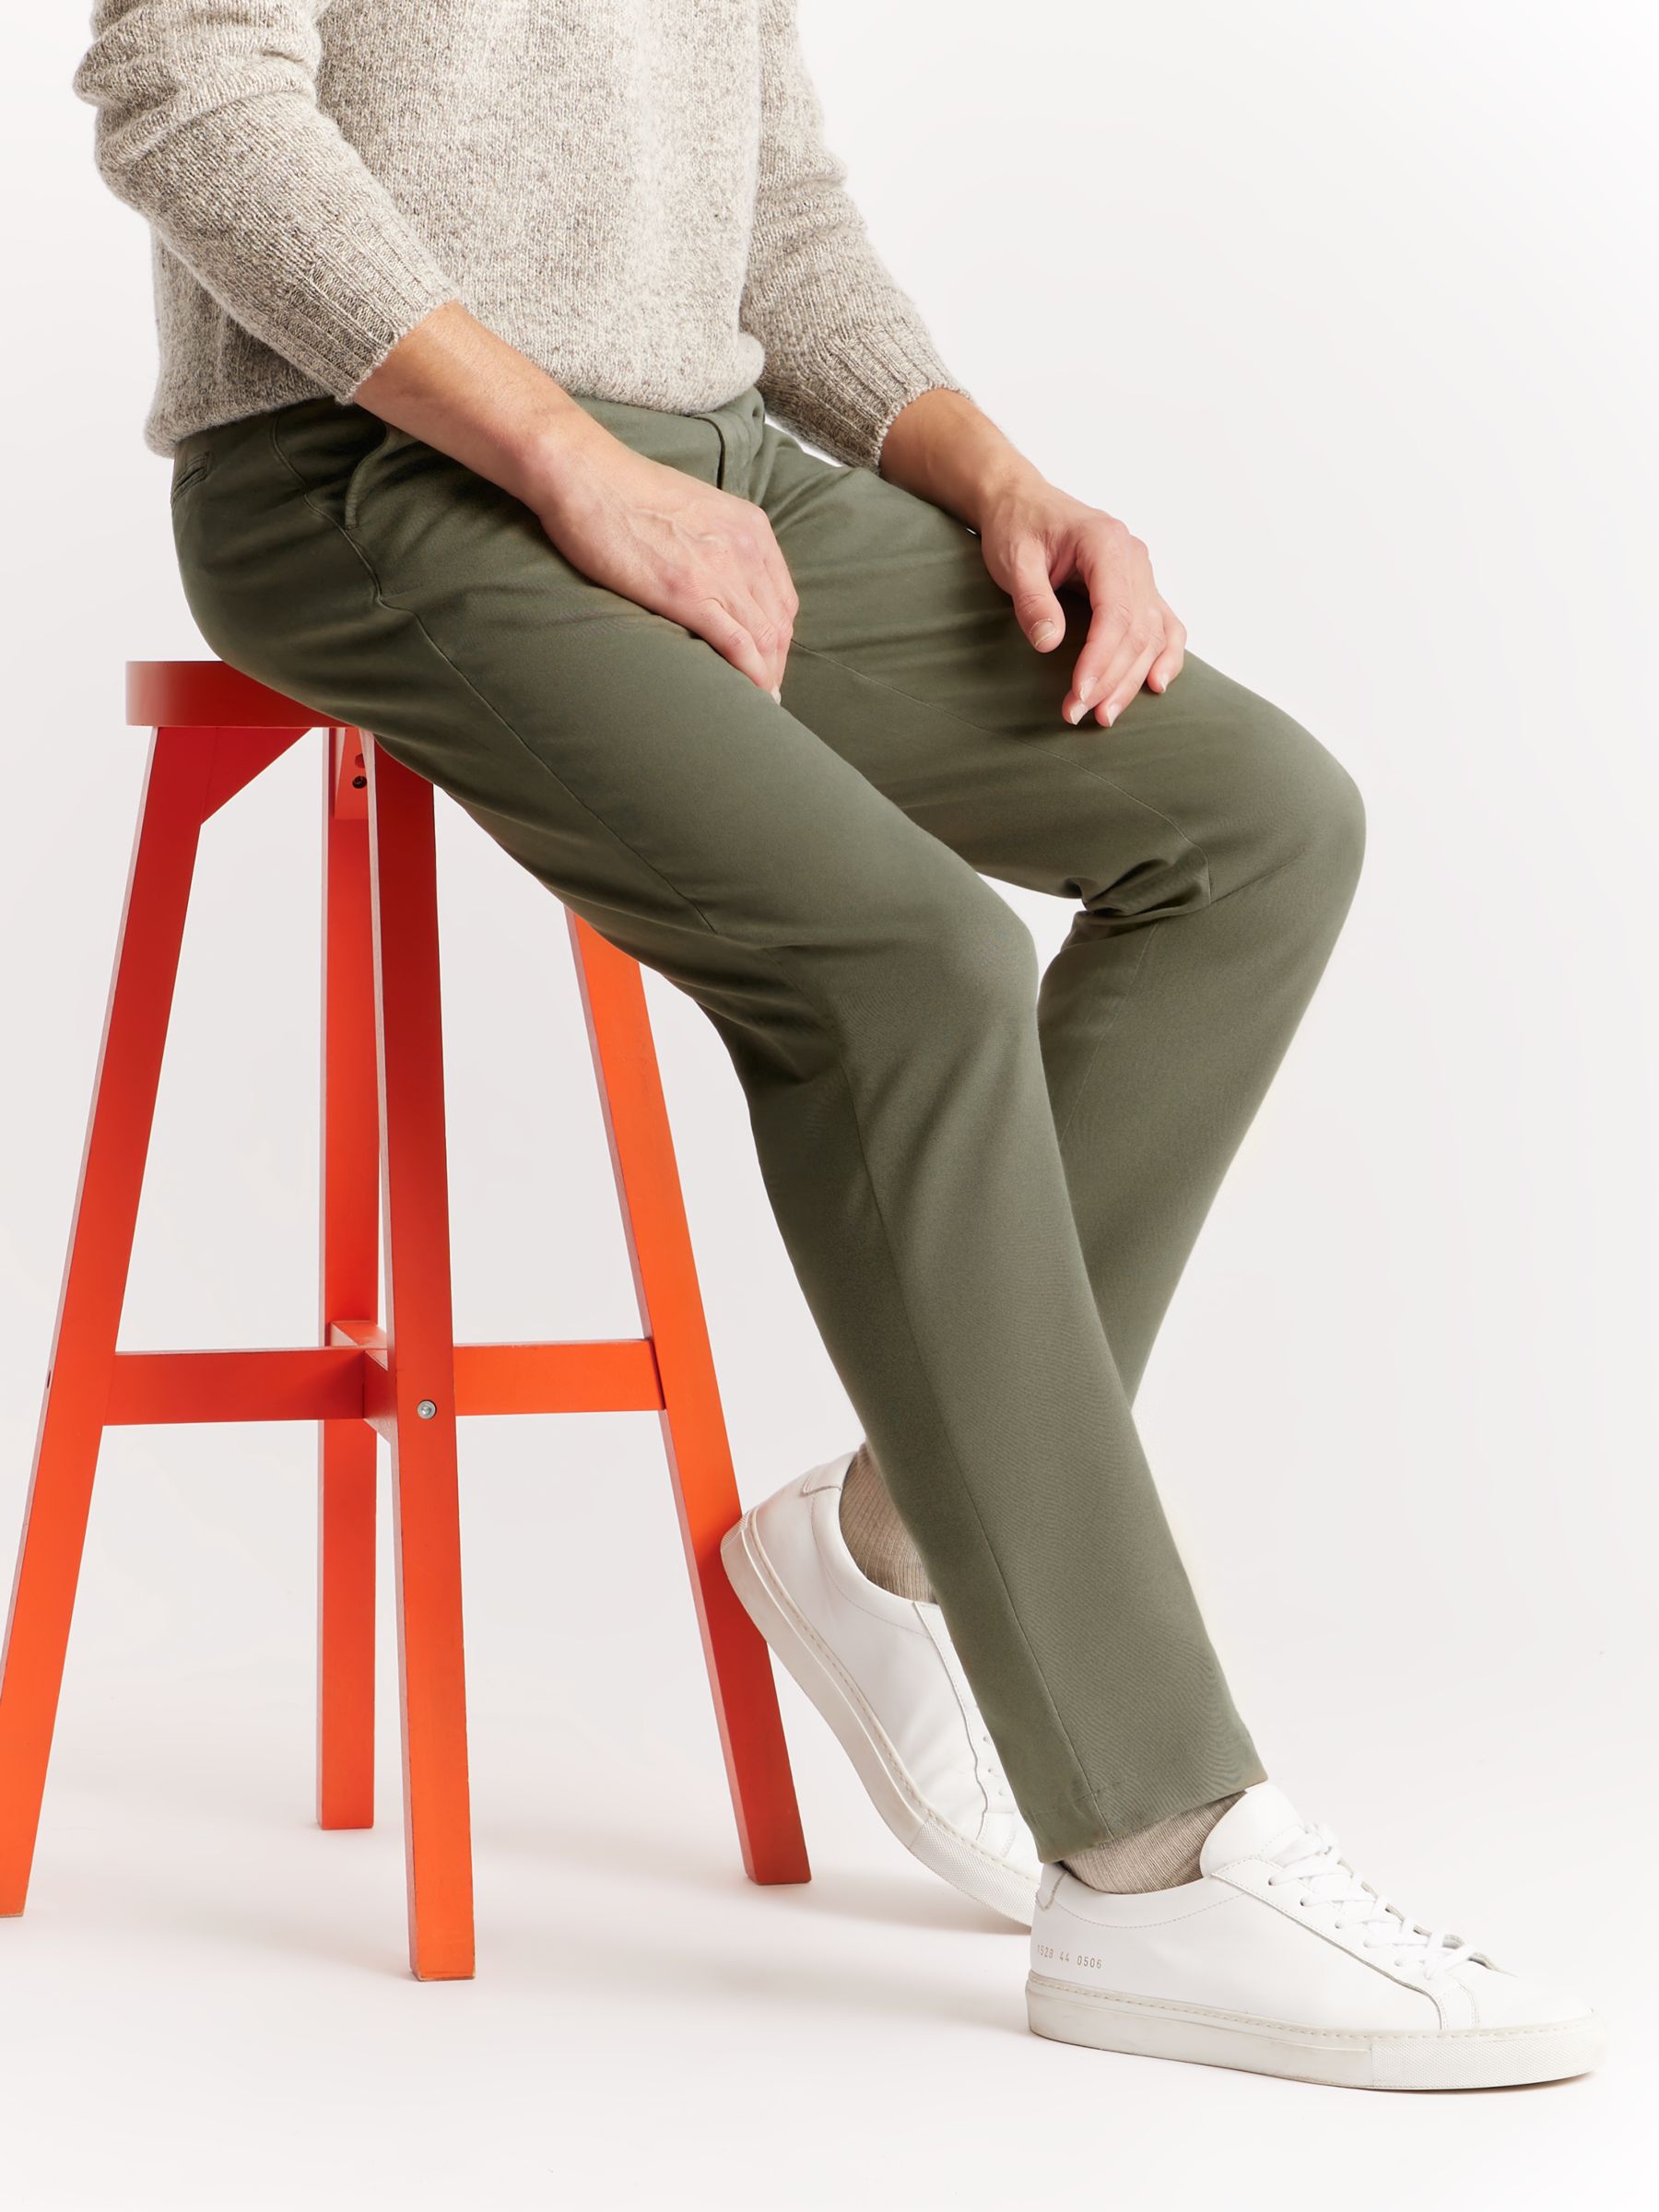 SPOKE Heroes Cotton Blend Narrow Thigh Chinos, Olive, W30/L28